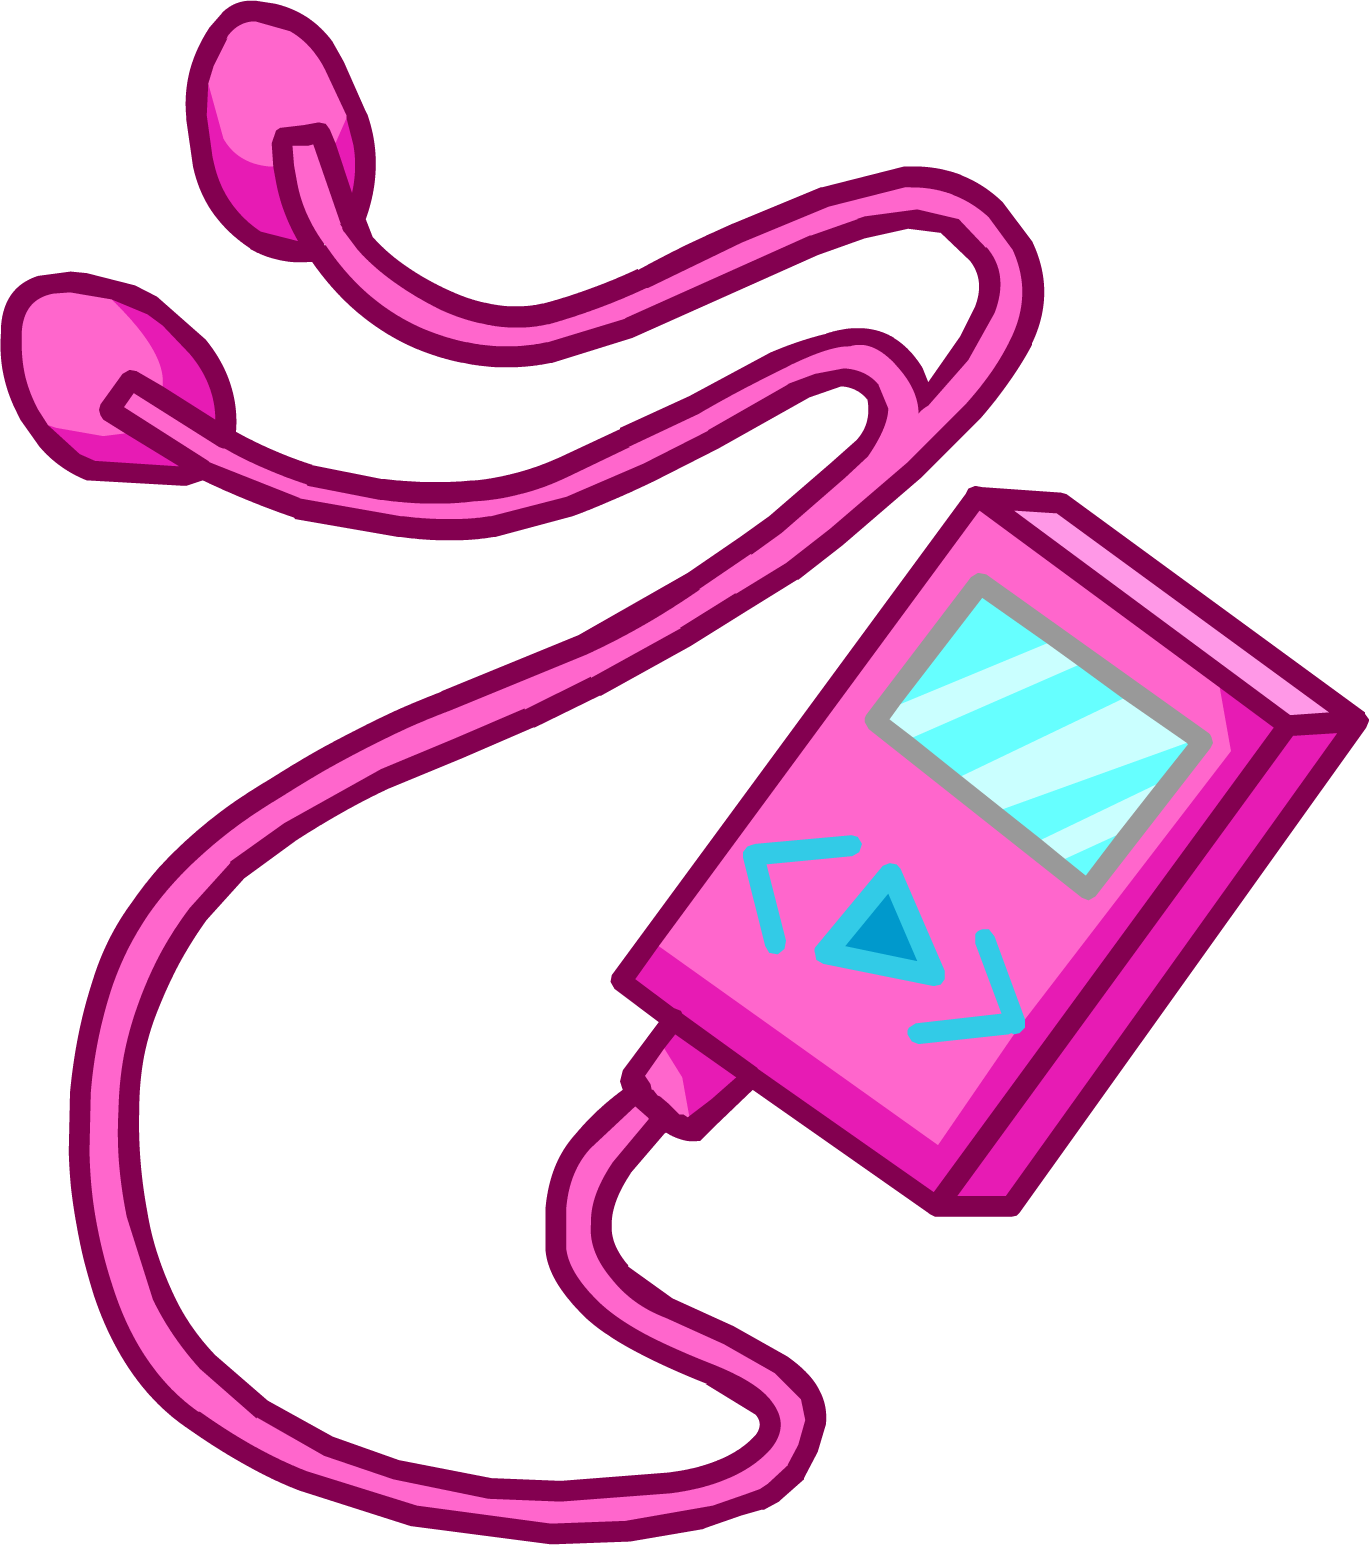 Earbuds clipart mp3. Pink mp club penguin